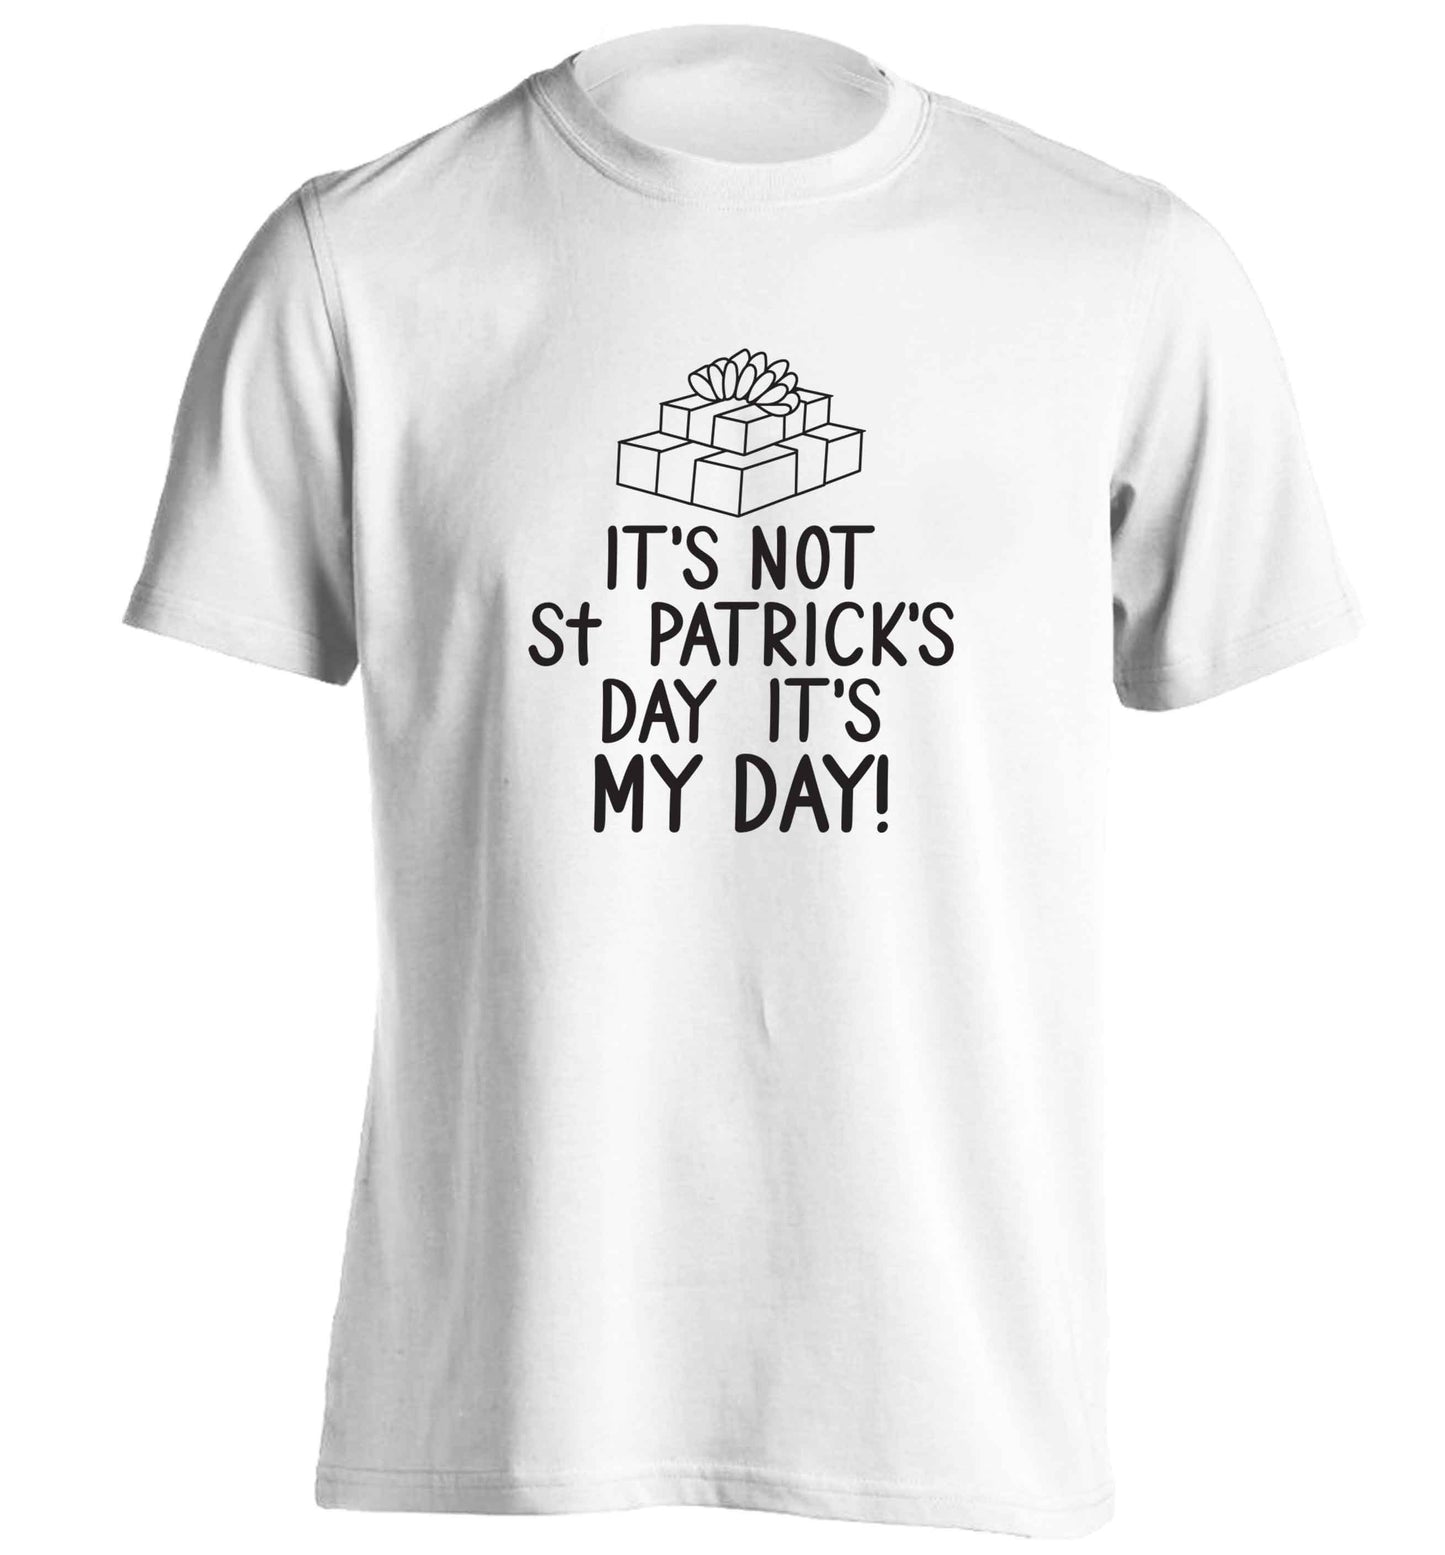 Funny gifts for your mum on mother's dayor her birthday! It's not St Patricks day it's my day adults unisex white Tshirt 2XL